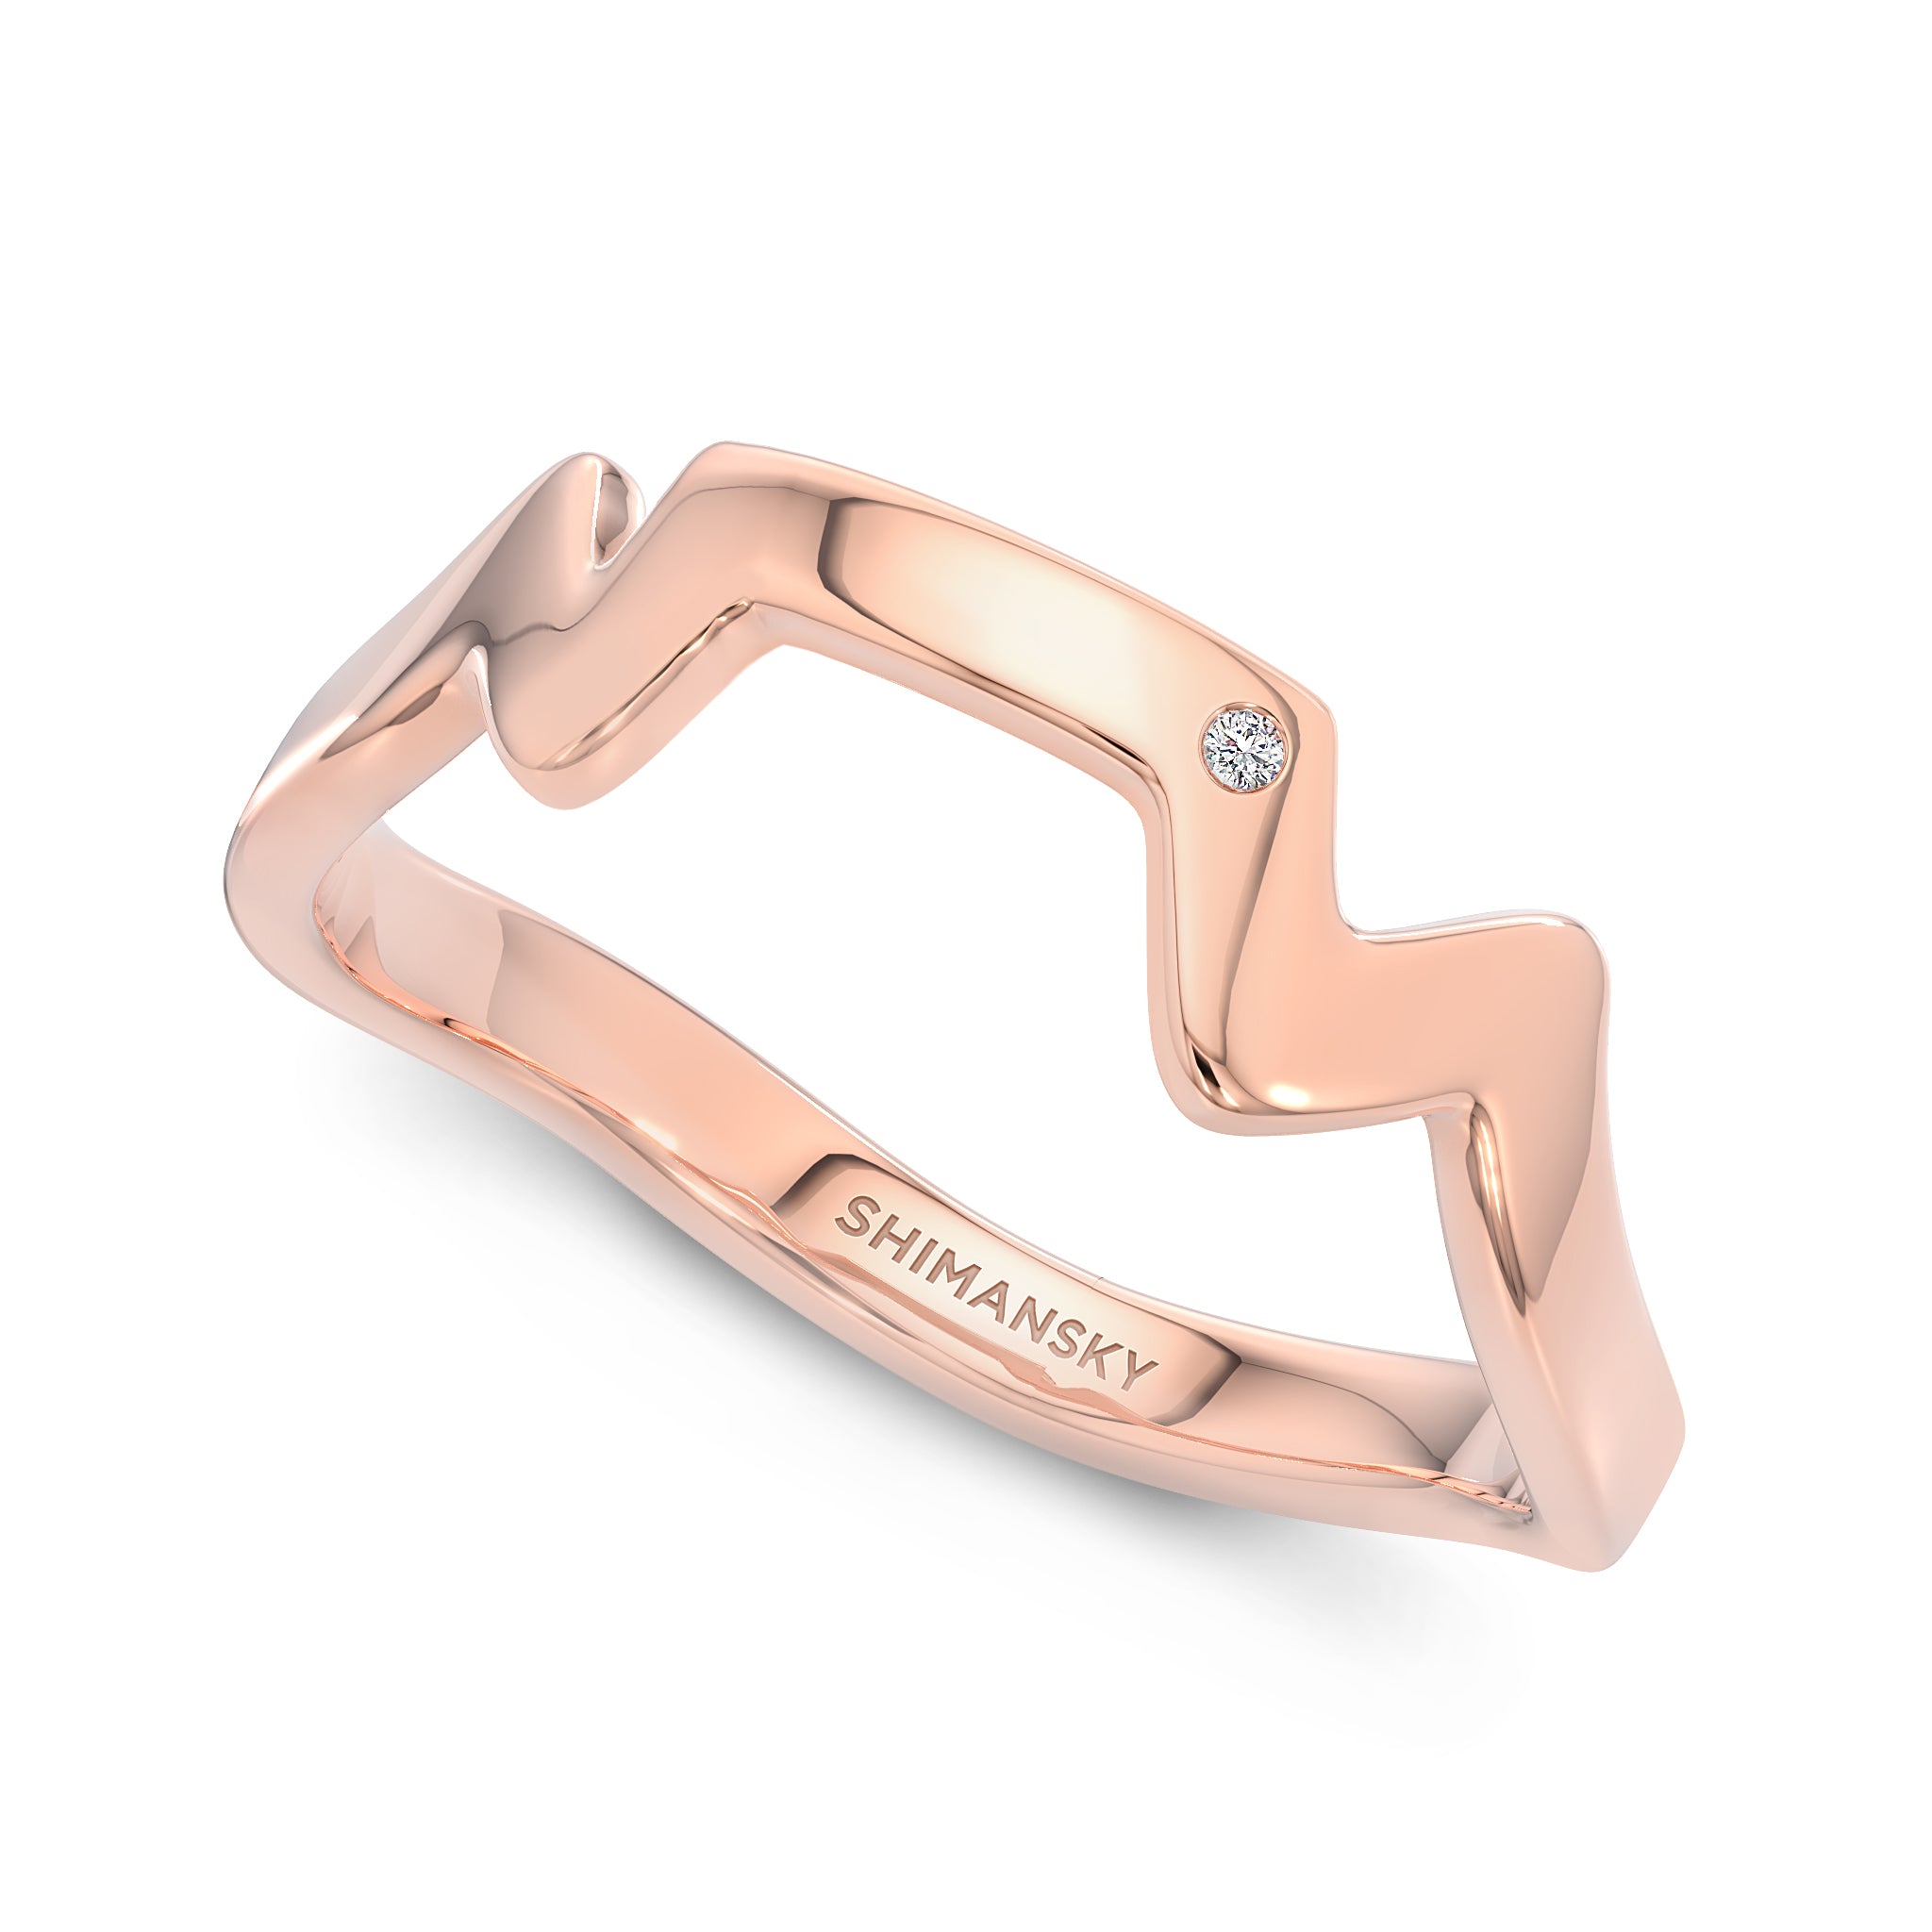 Shimansky - Table Mountain Single Diamond Ring Crafted in 14K Rose Gold